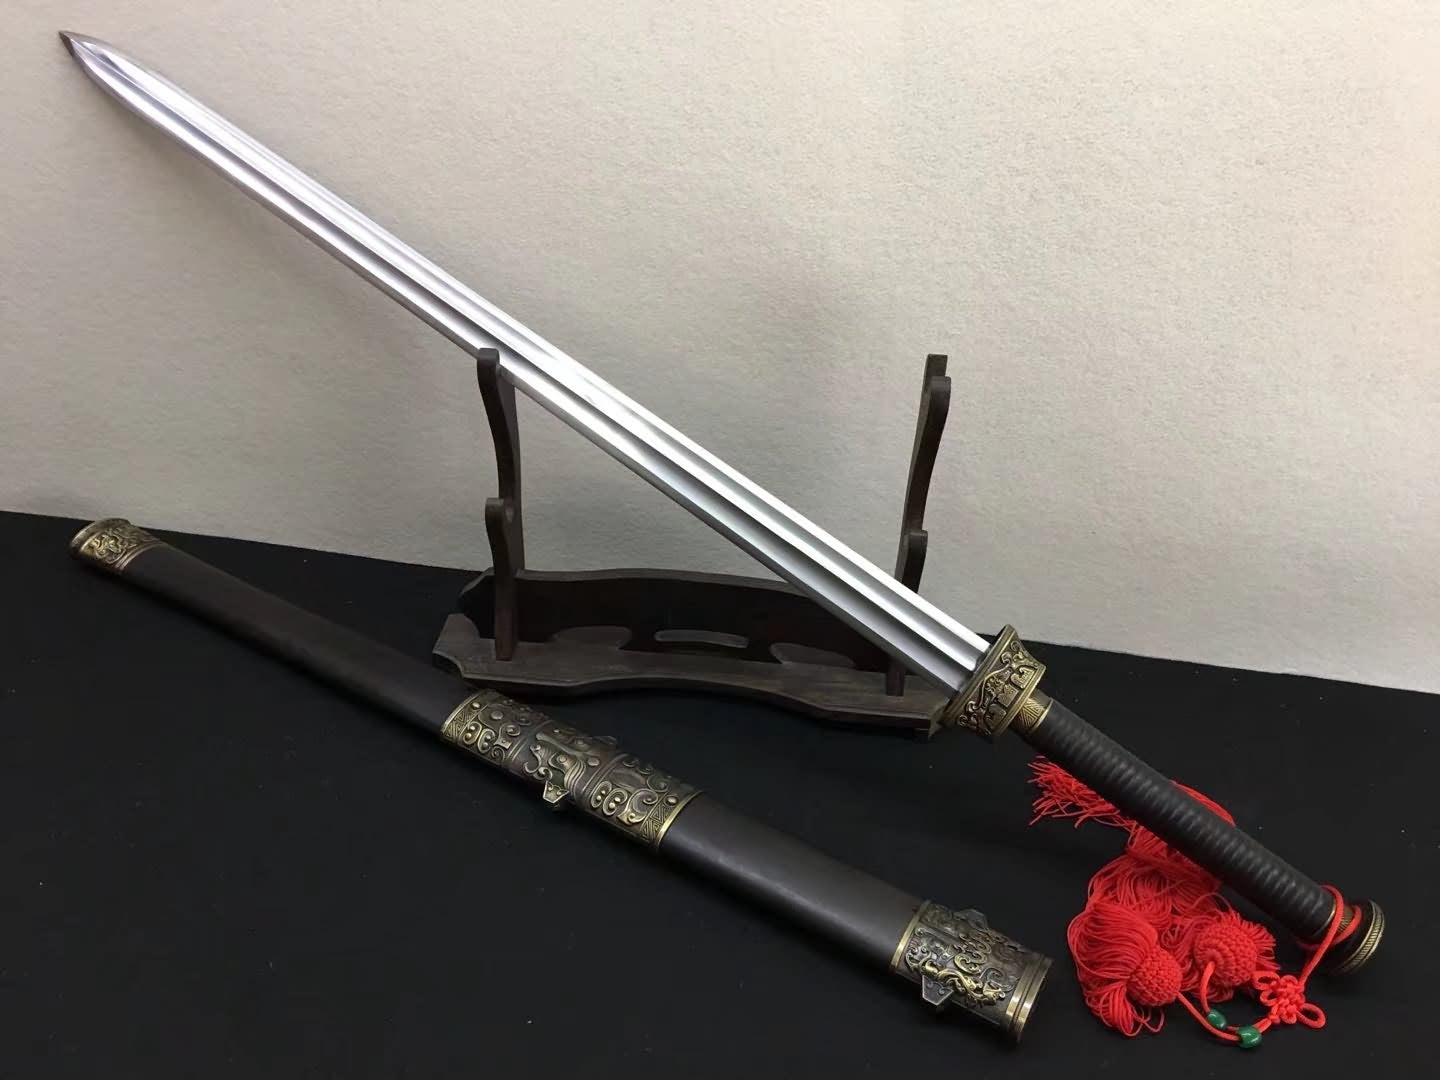 Fengyun sword,High carbon steel blade,Black scabbard,Alloy fittings - Chinese sword shop